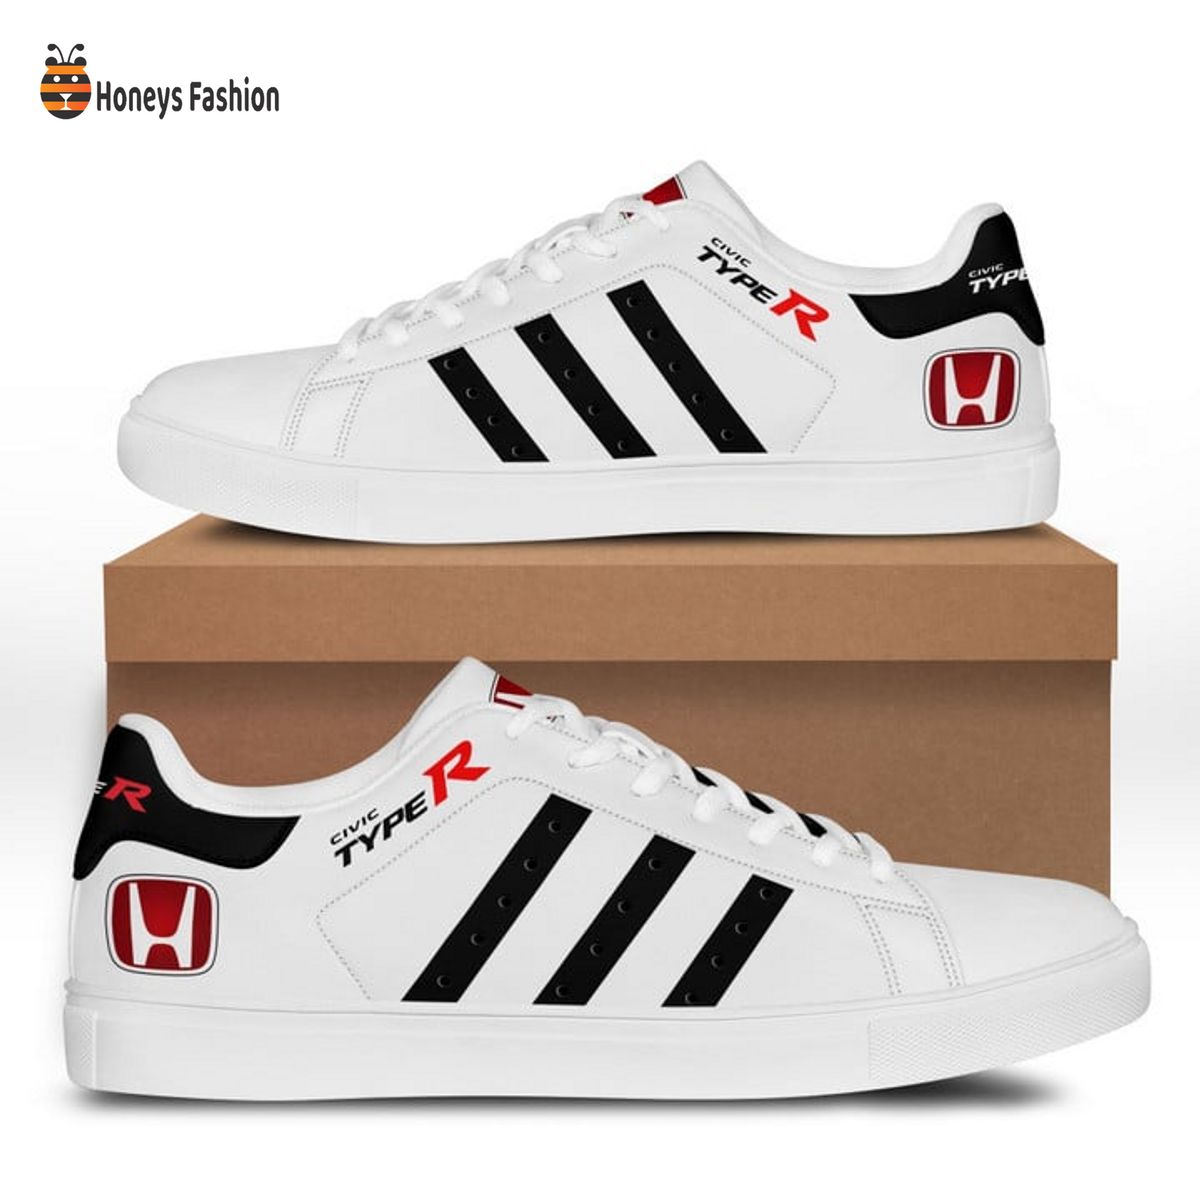 Honda Civic Type R White Stan Smith Low Top Shoes